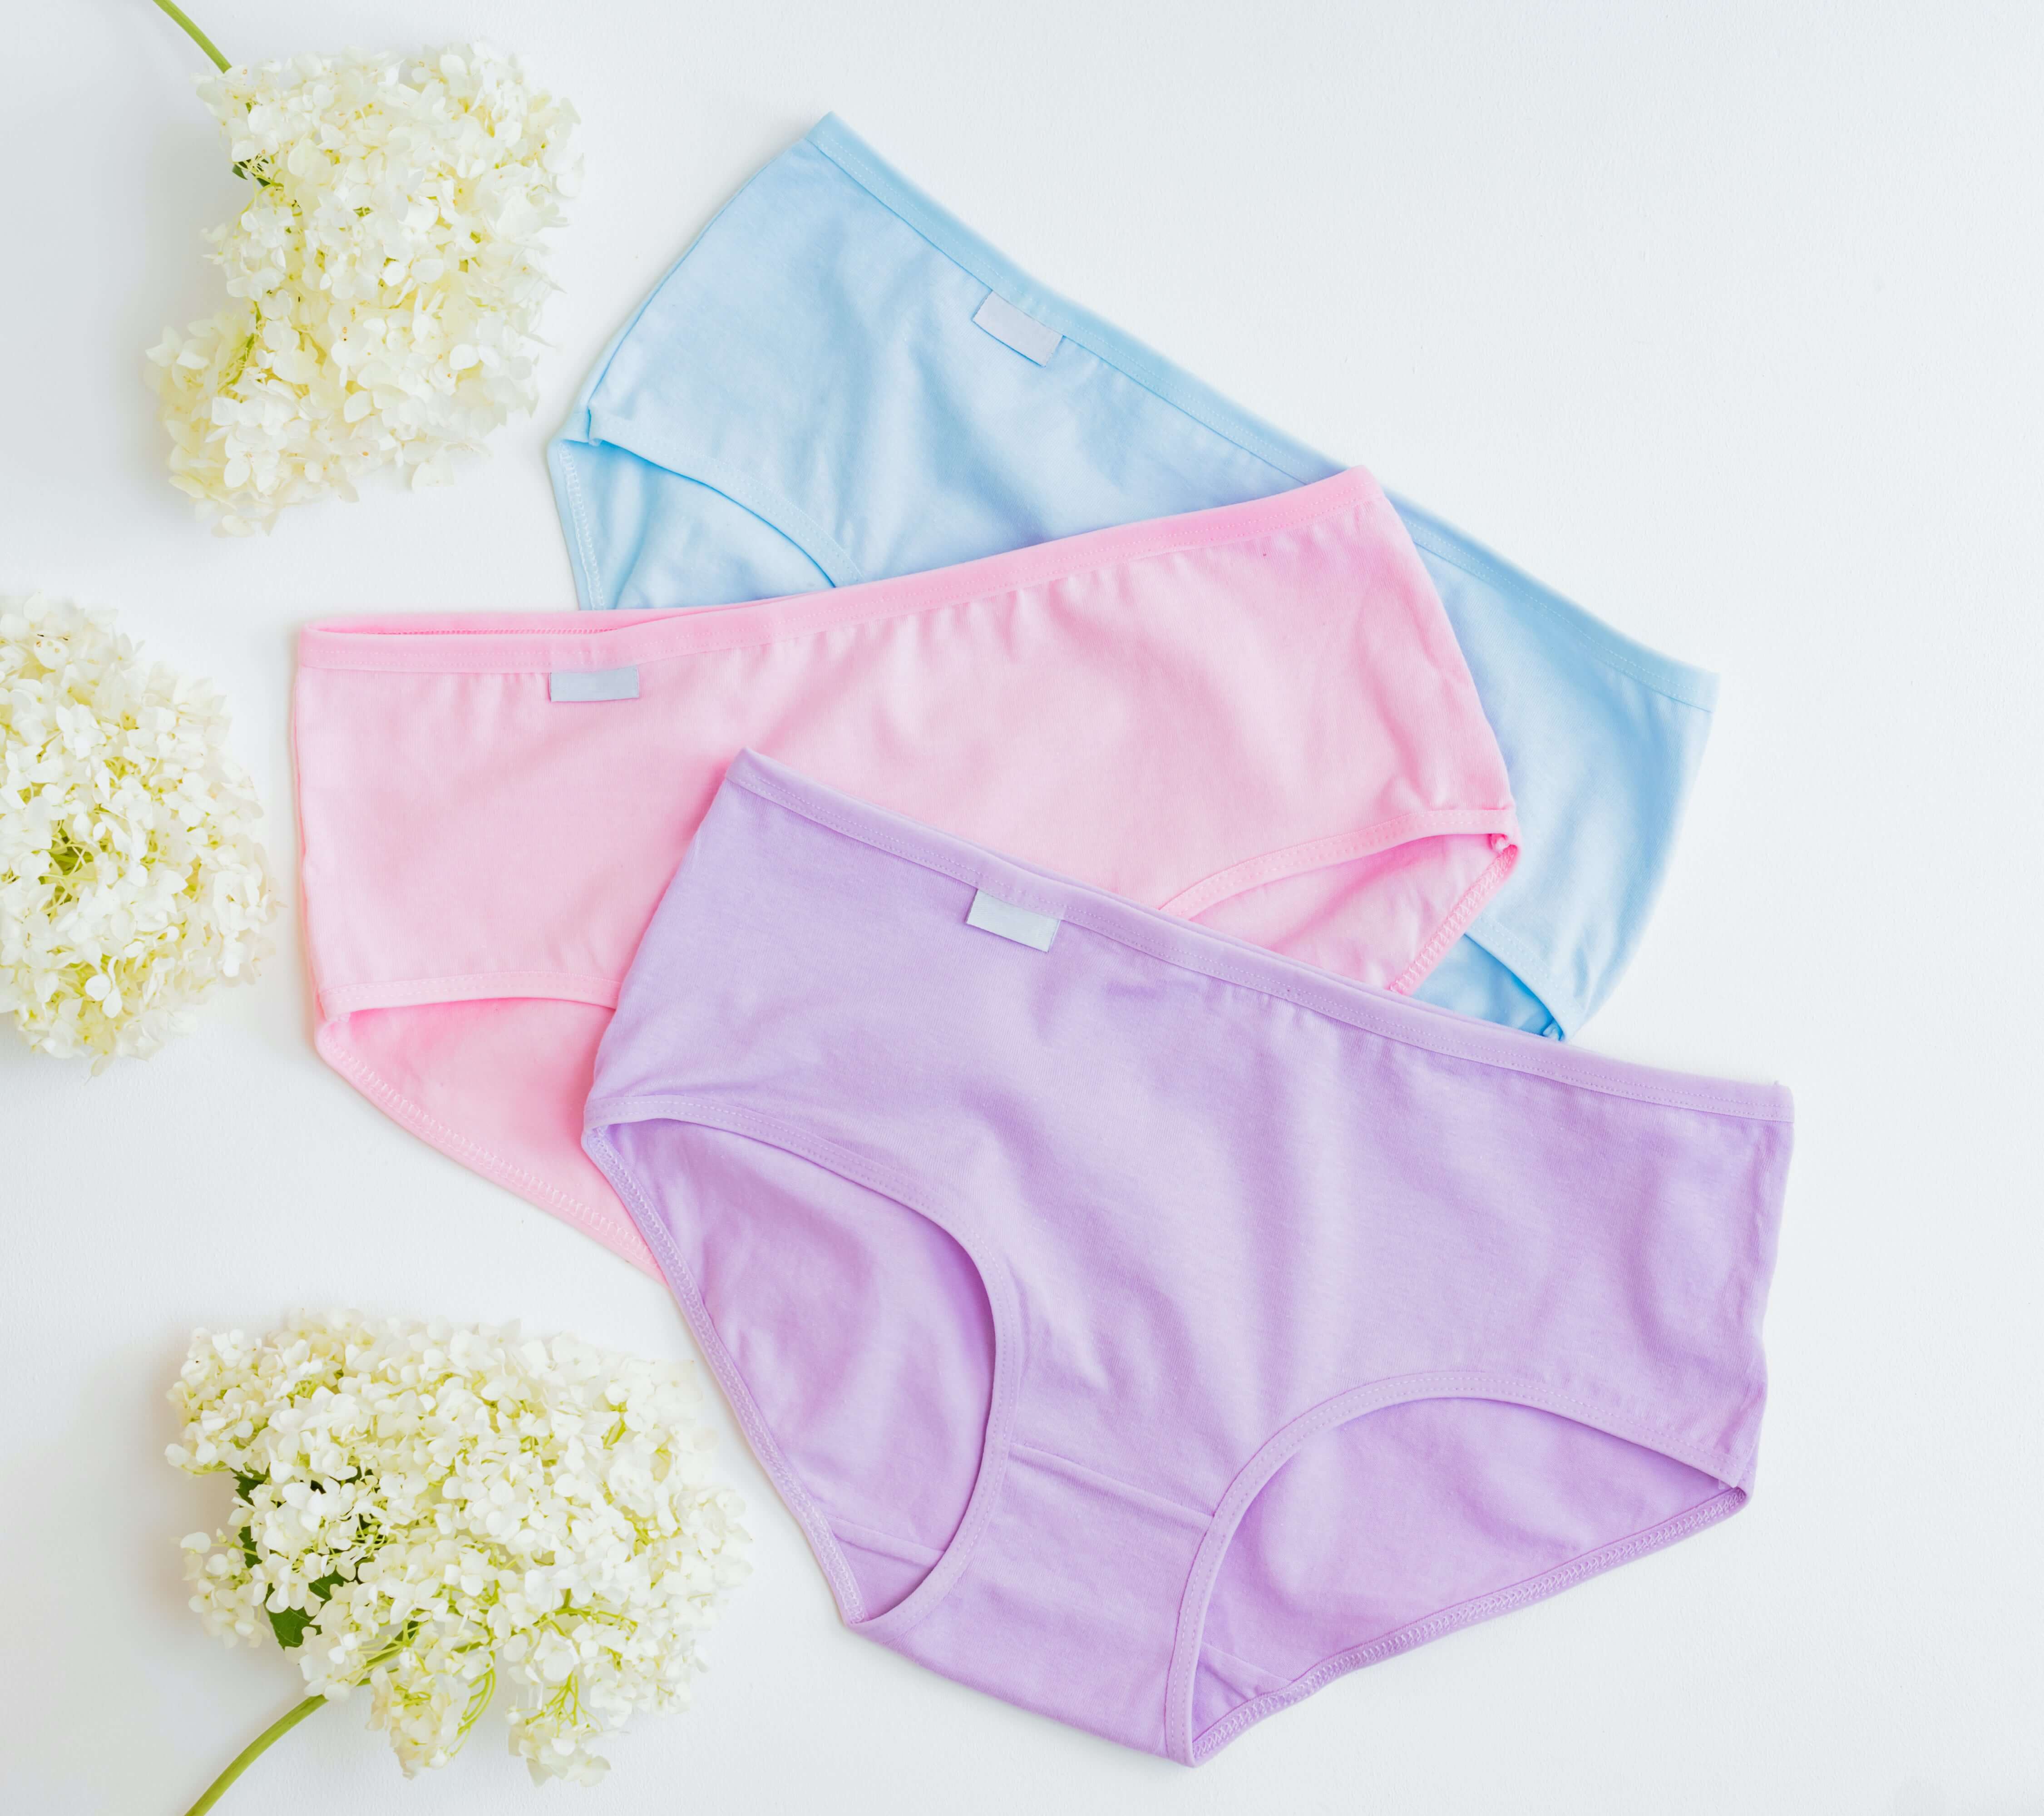 5 pro tips you should know before shopping for underwear